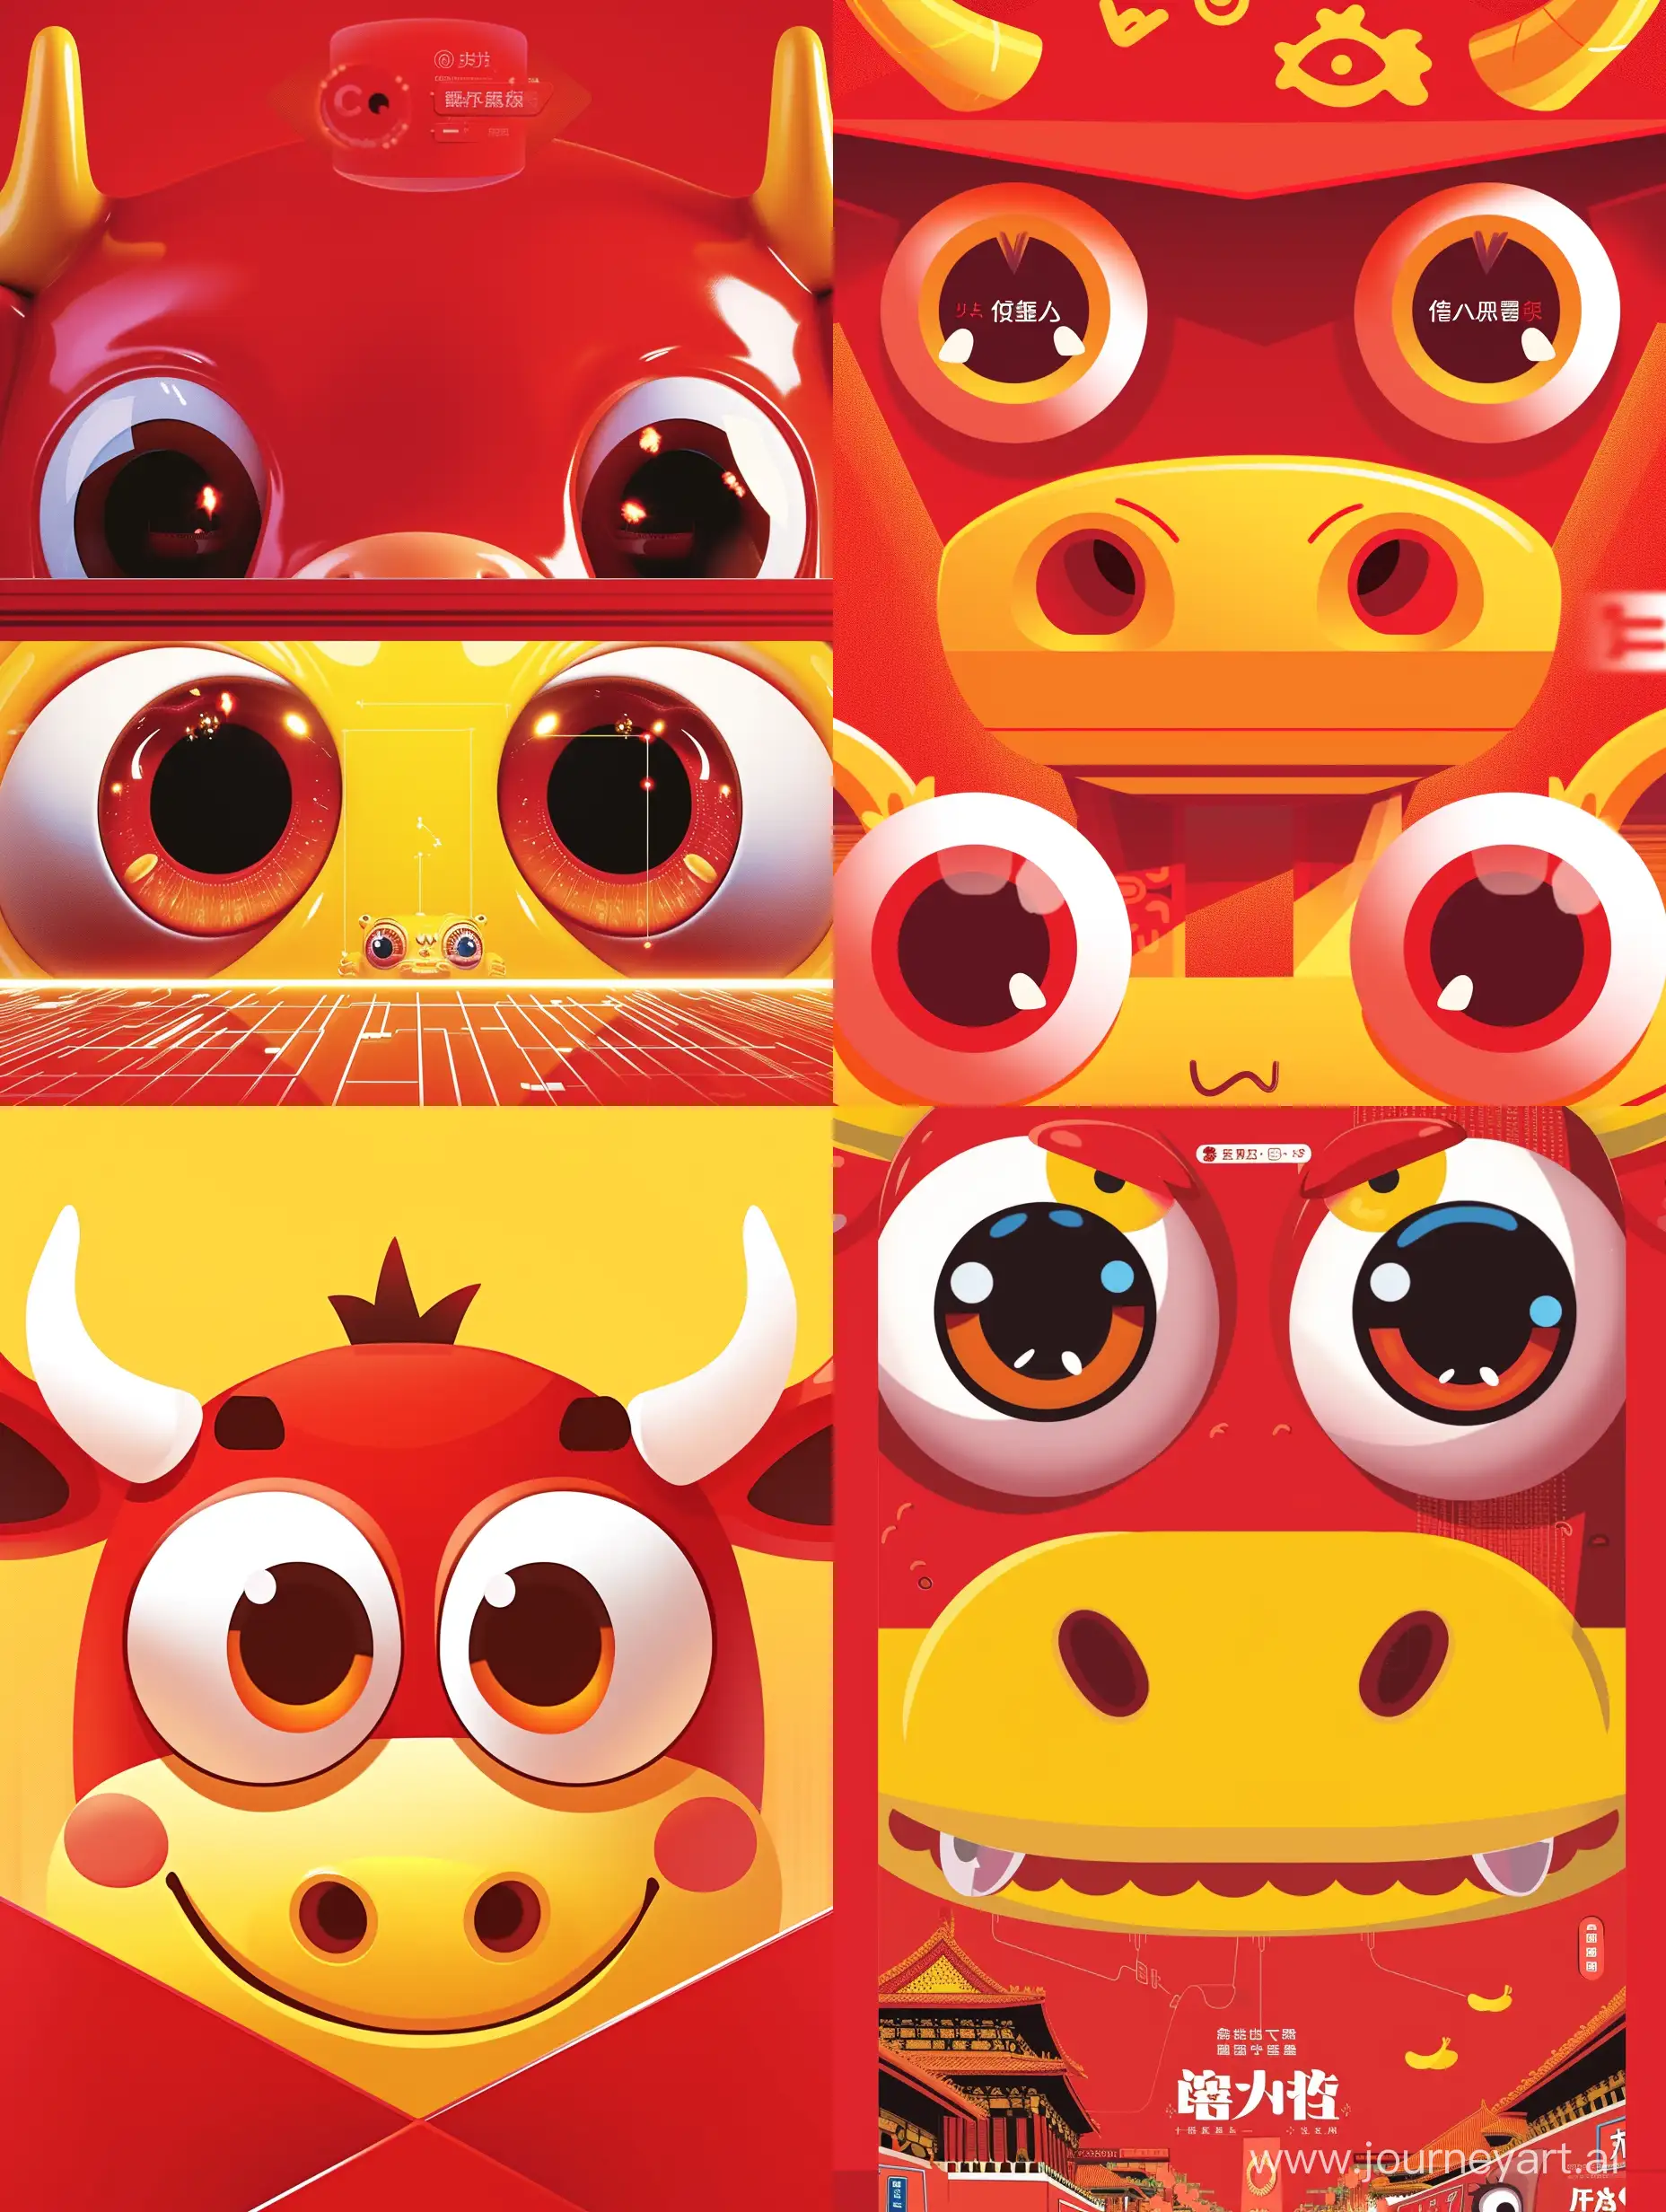 Techthemed-WeChat-Red-Envelope-with-Playful-Cow-Design